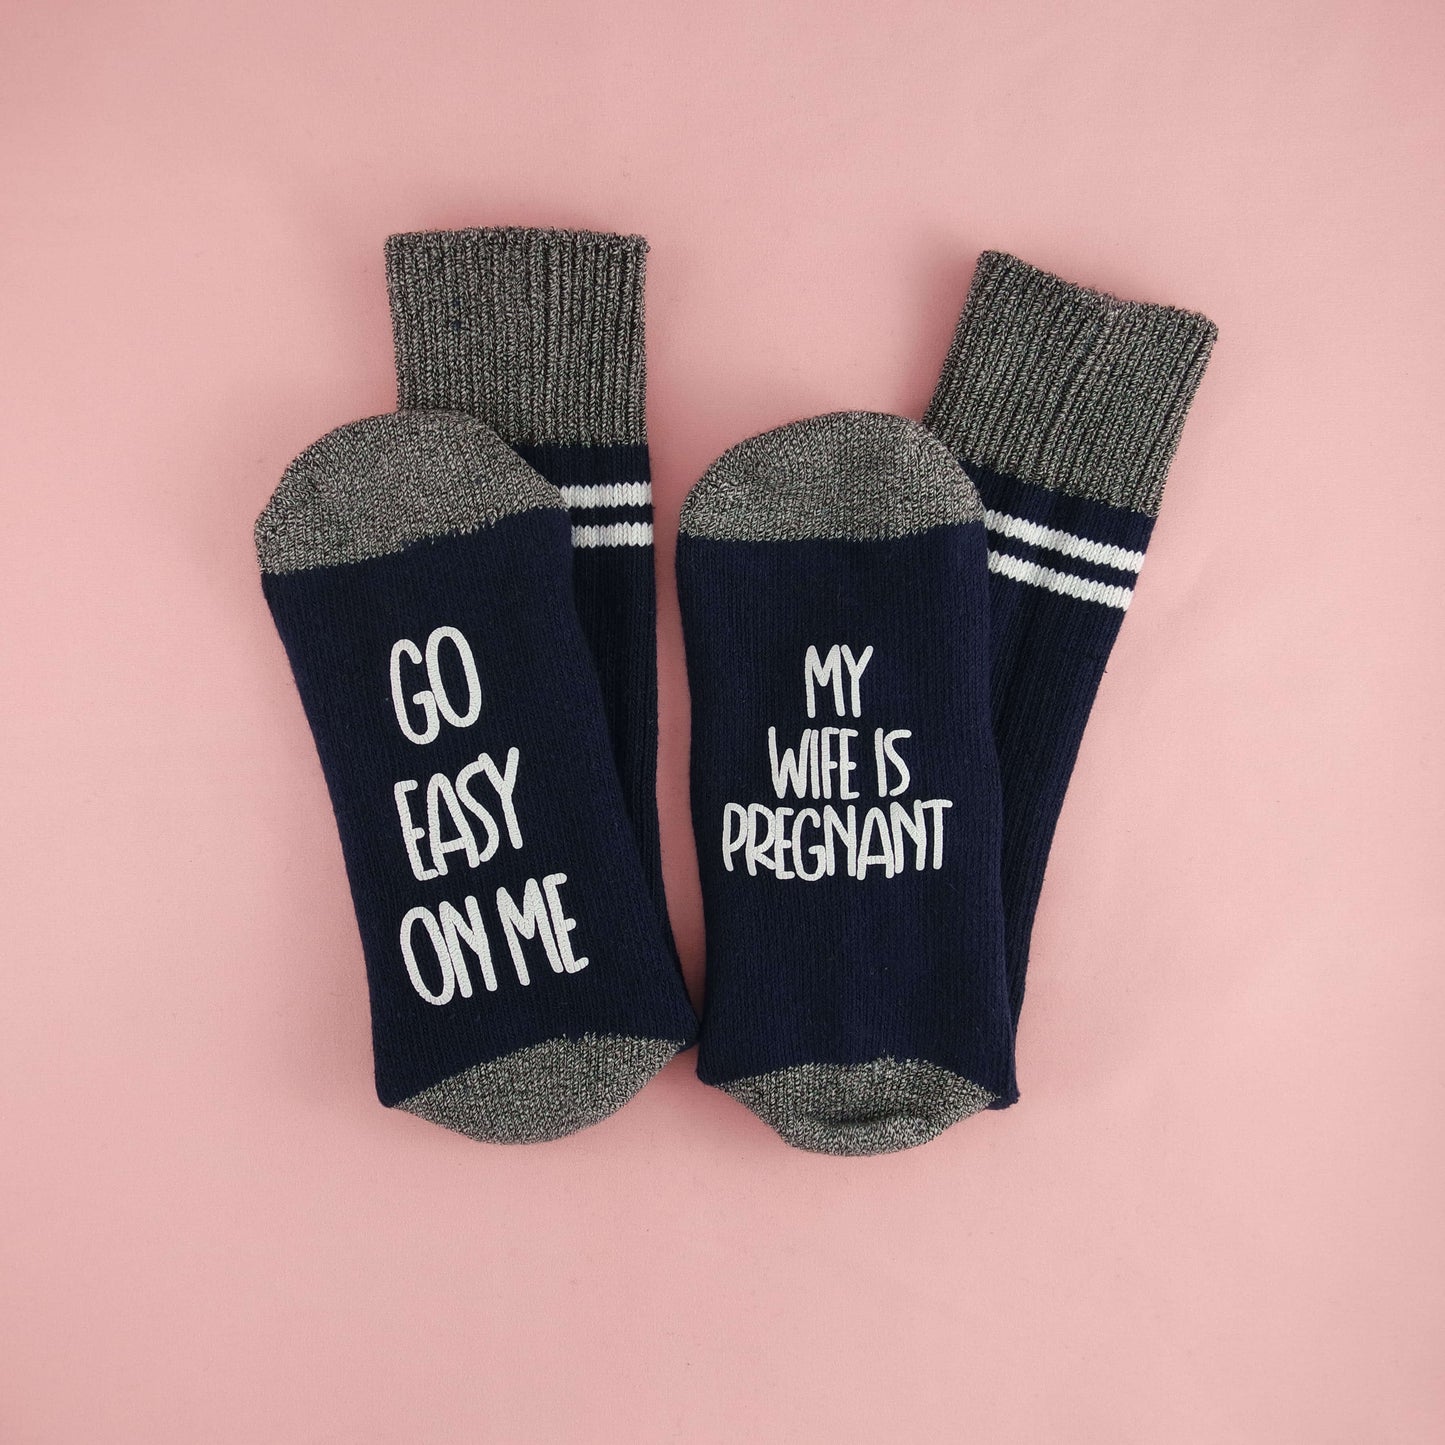 socks with a light-hearted message for expectant fathers, emphasizing the need for understanding and patience during pregnancy with the phrases 'GO EASY ON ME' and 'MY WIFE IS PREGNANT.